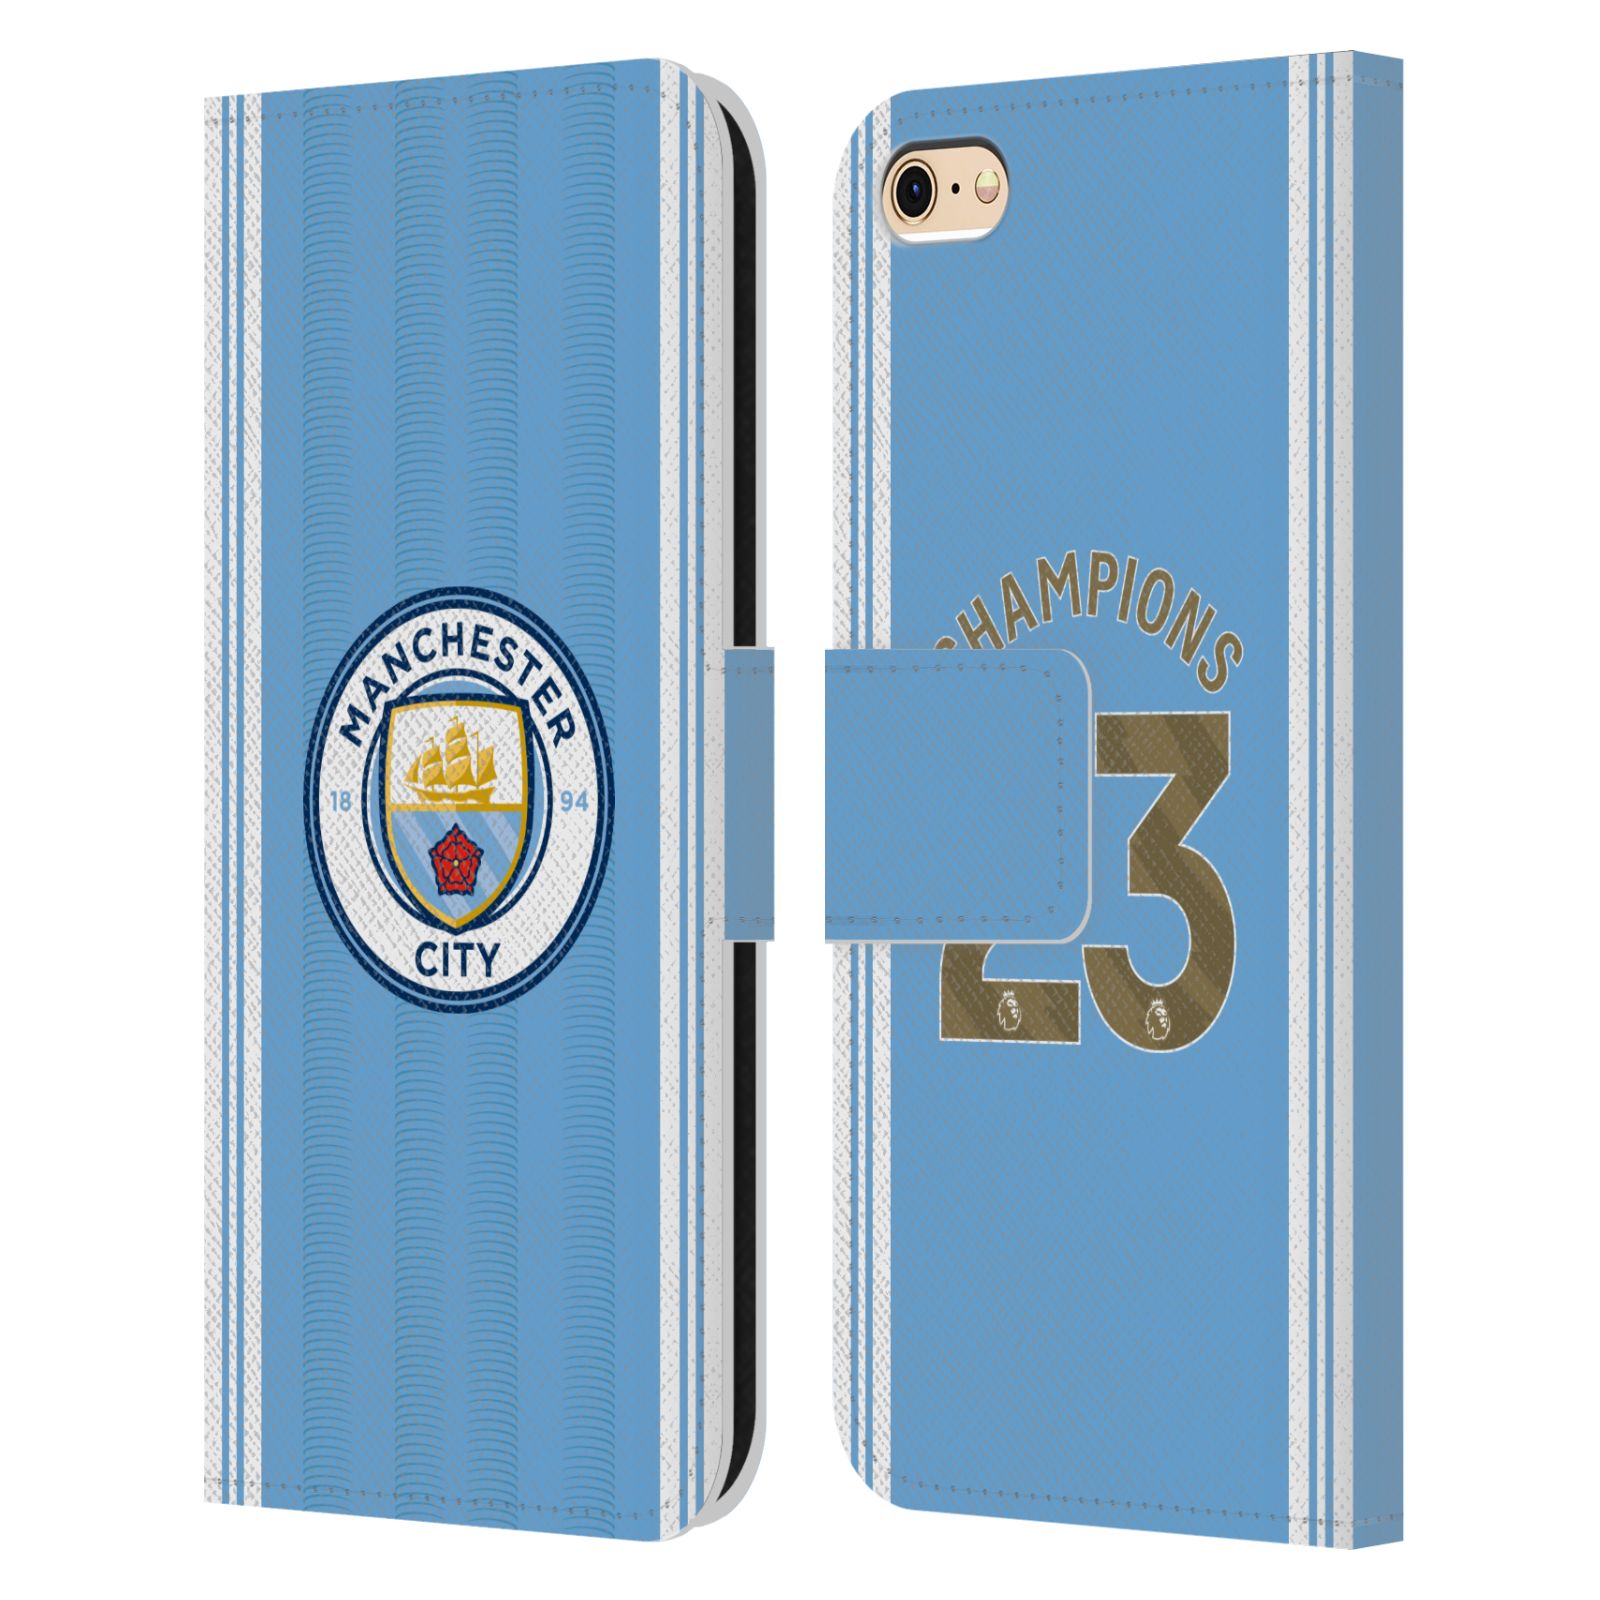 Pouzdro na mobil Apple Iphone 6 / 6S - HEAD CASE - Manchester City - Champions dres